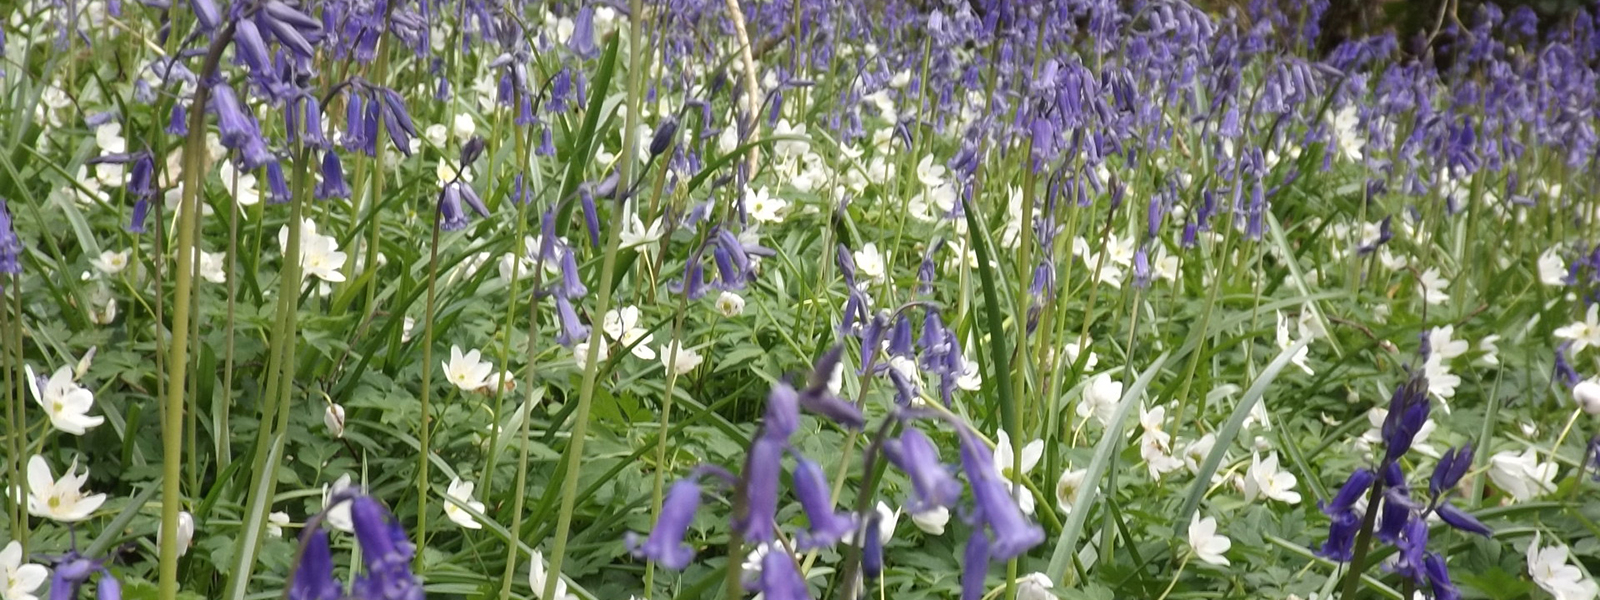 Bluebells and ramson flowers in the retreat woodland